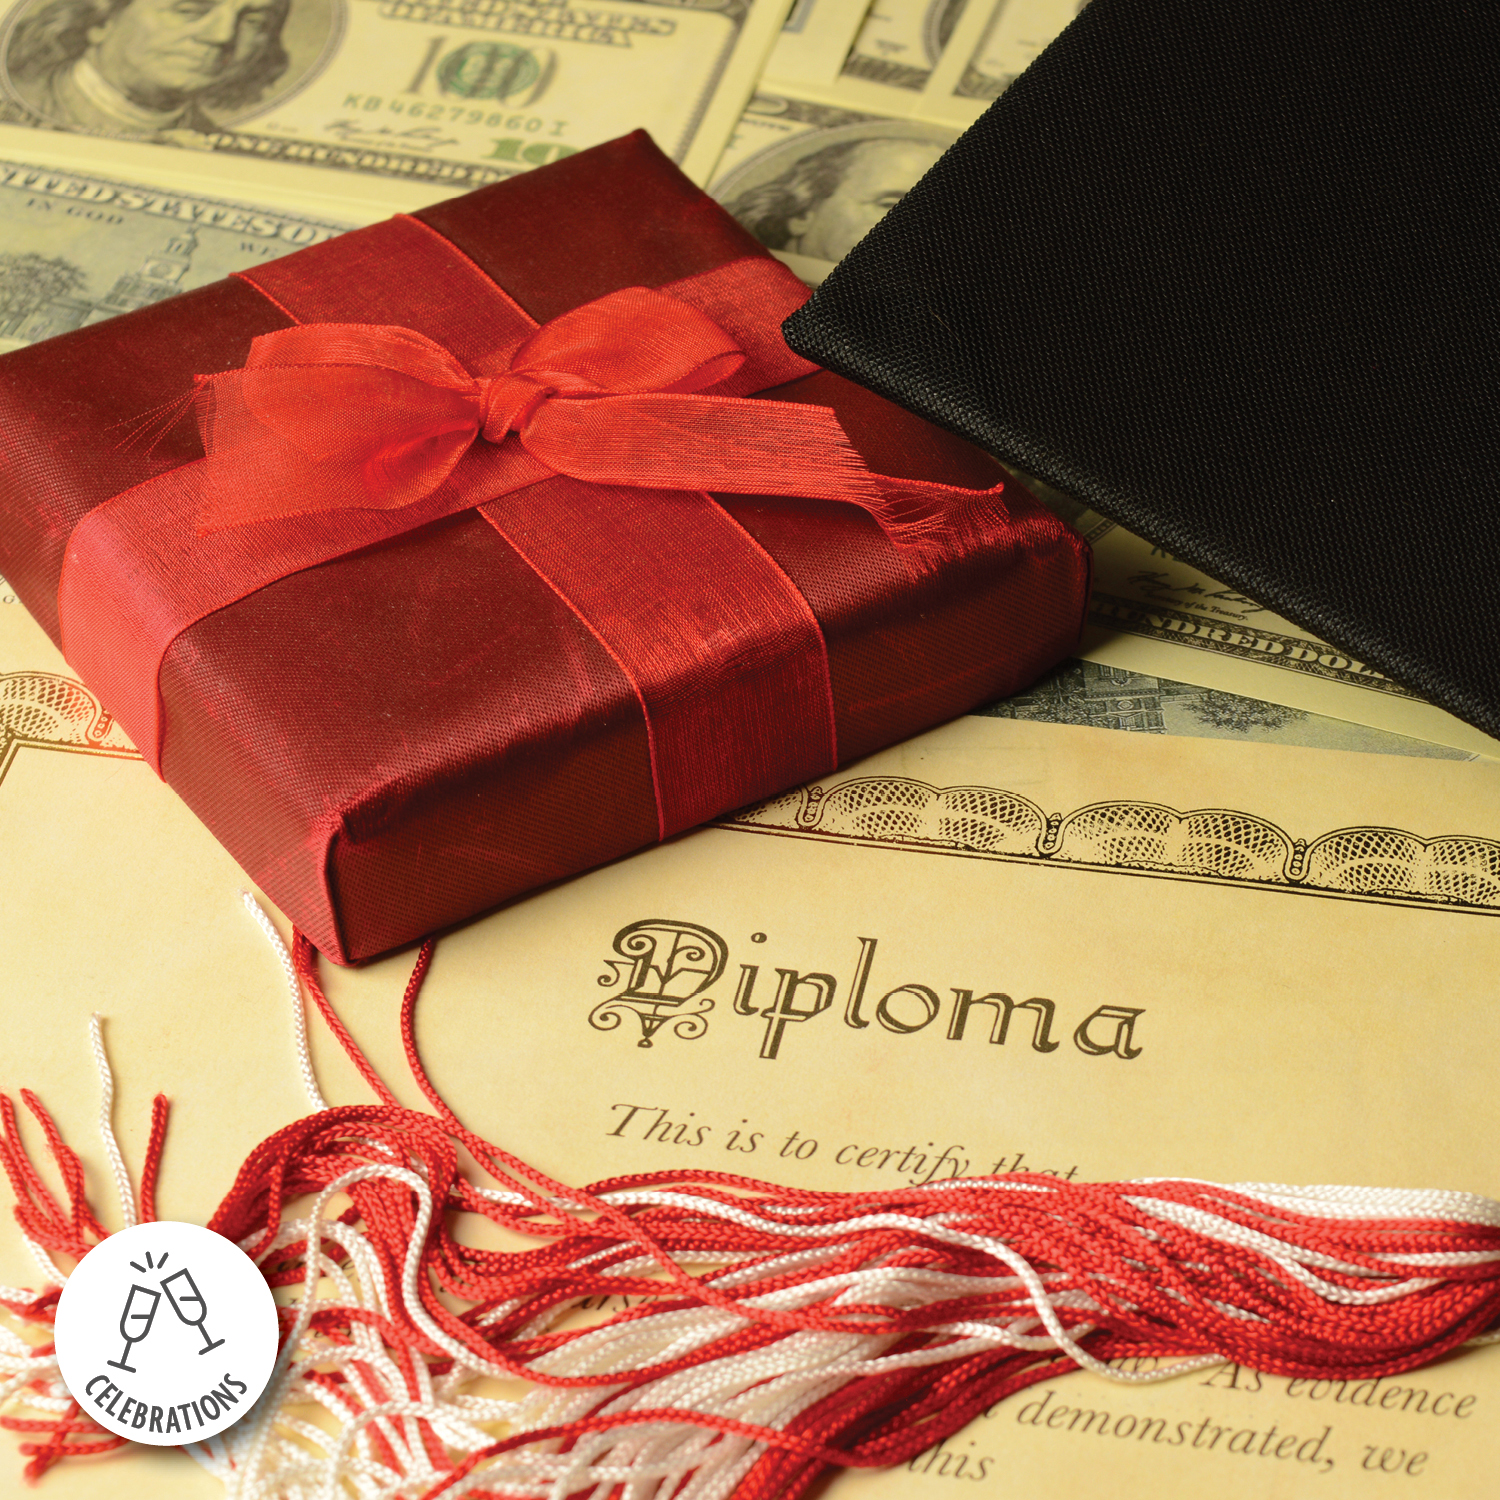 How Can I Buy a Meaningful Graduation Gift Without Breaking My Budget?